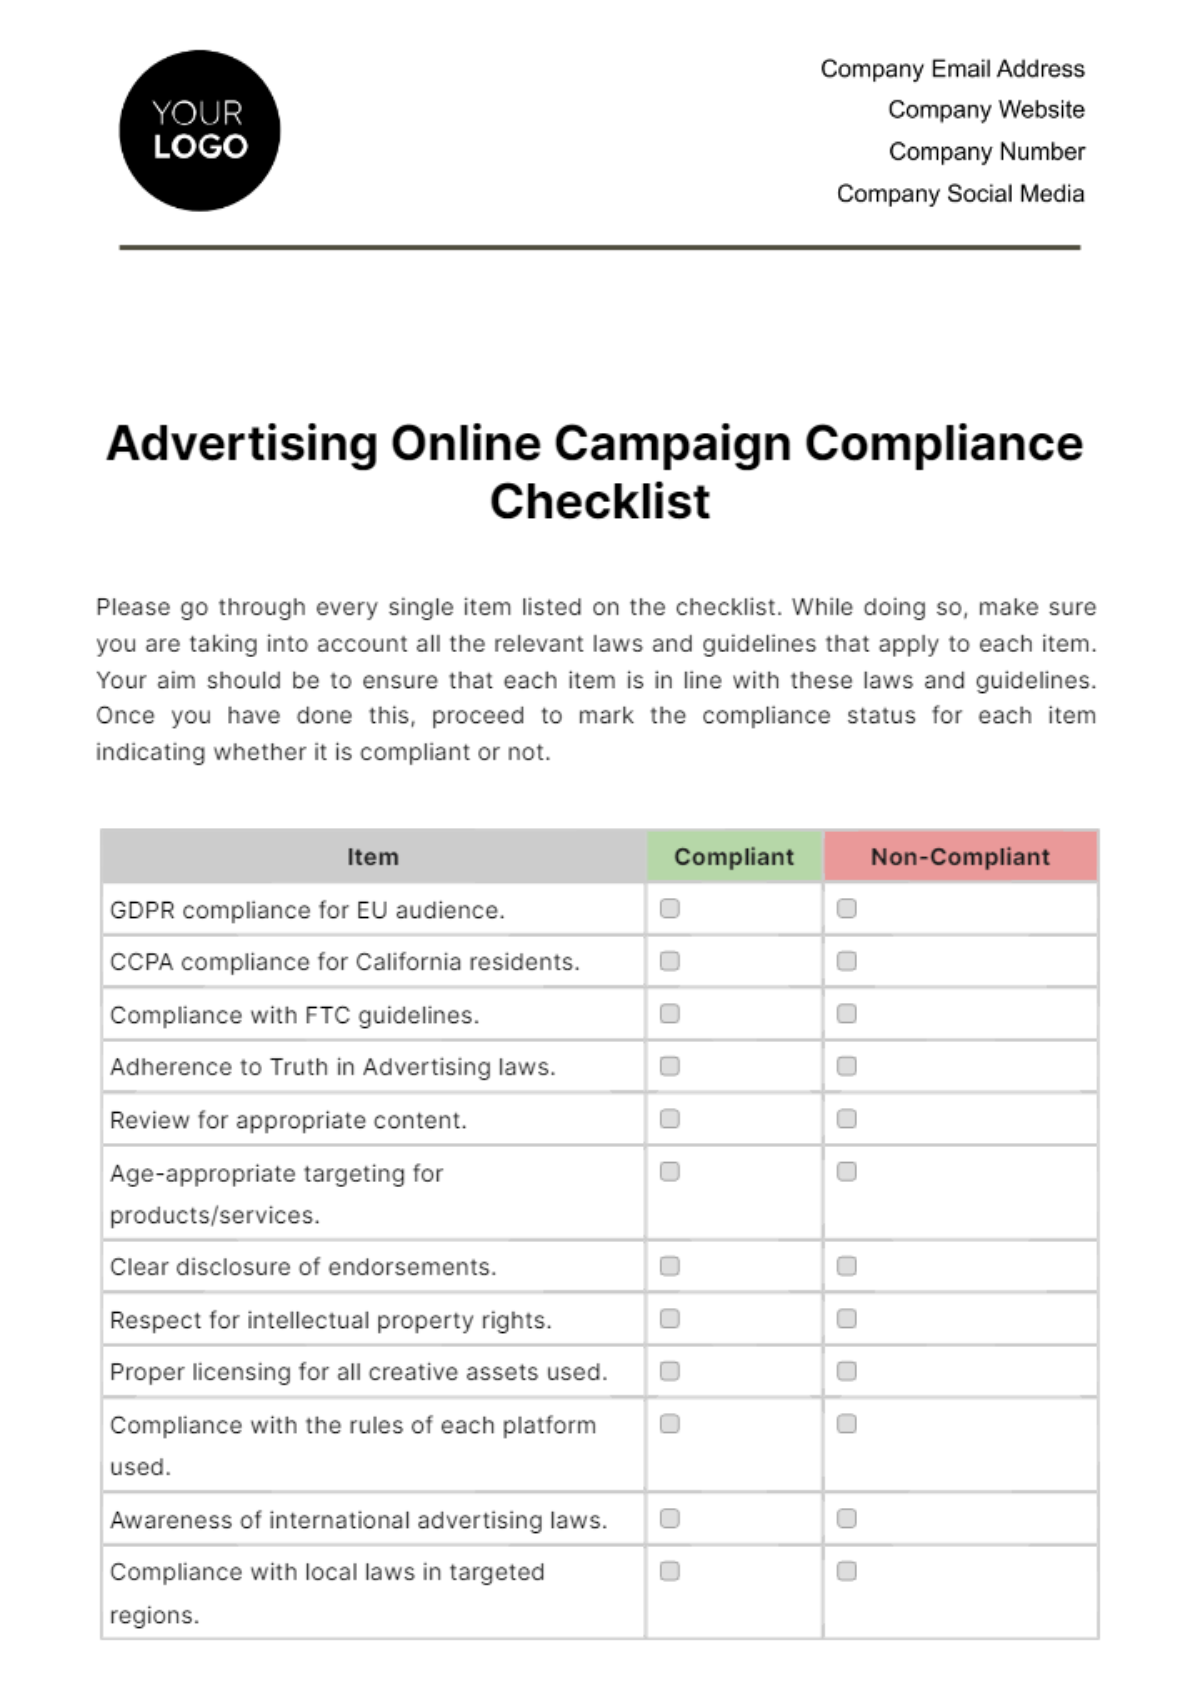 Free Advertising Online Campaign Compliance Checklist Template